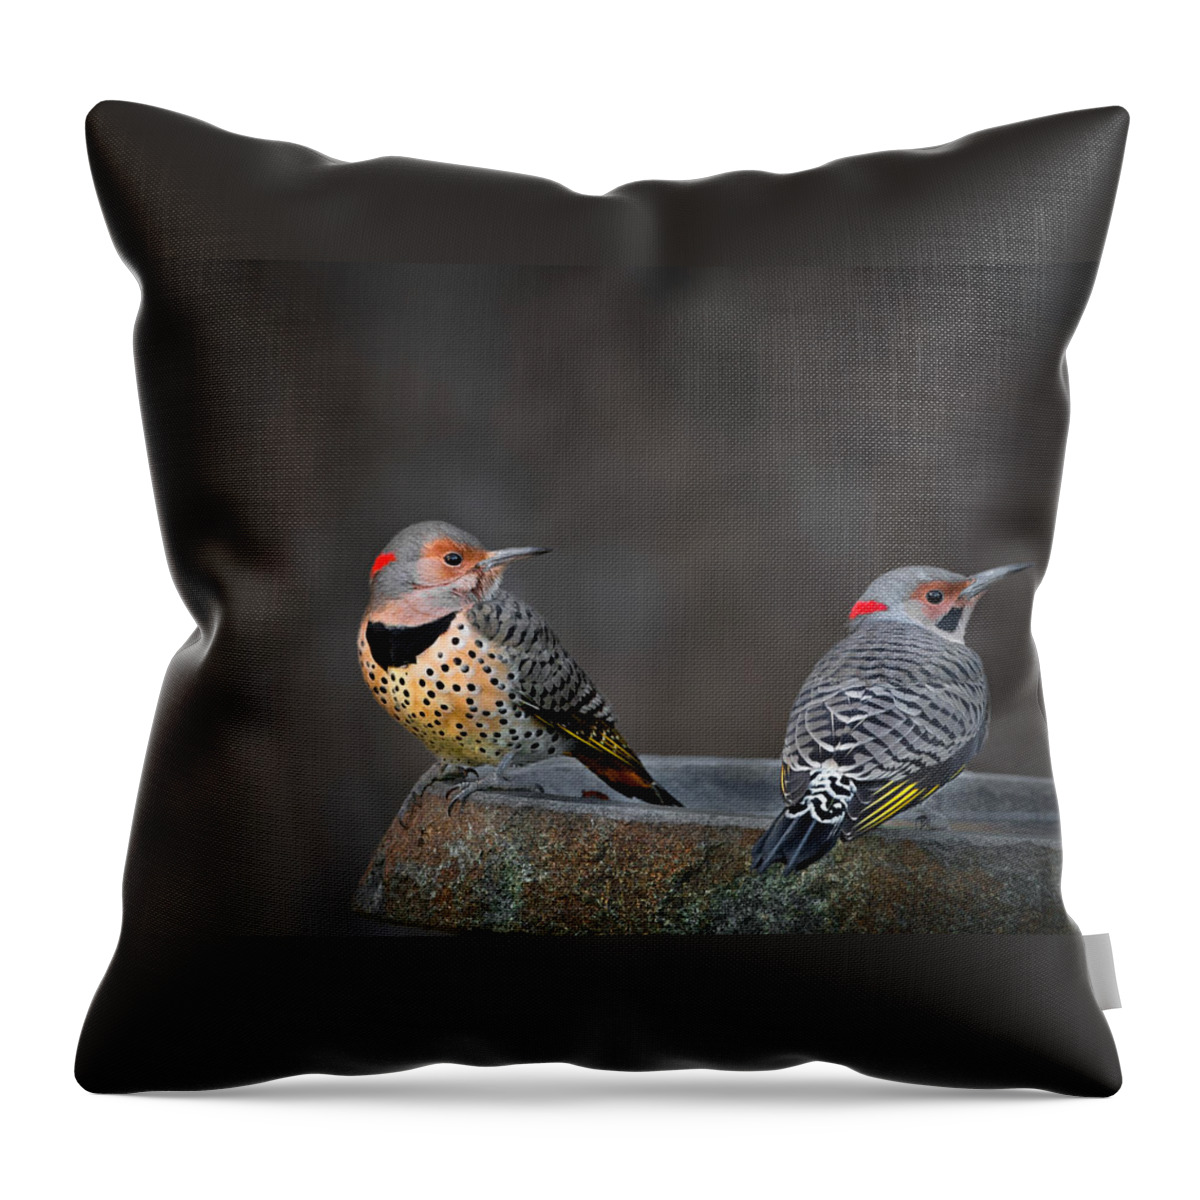  Throw Pillow featuring the photograph Northern Flickers by Bill Wakeley